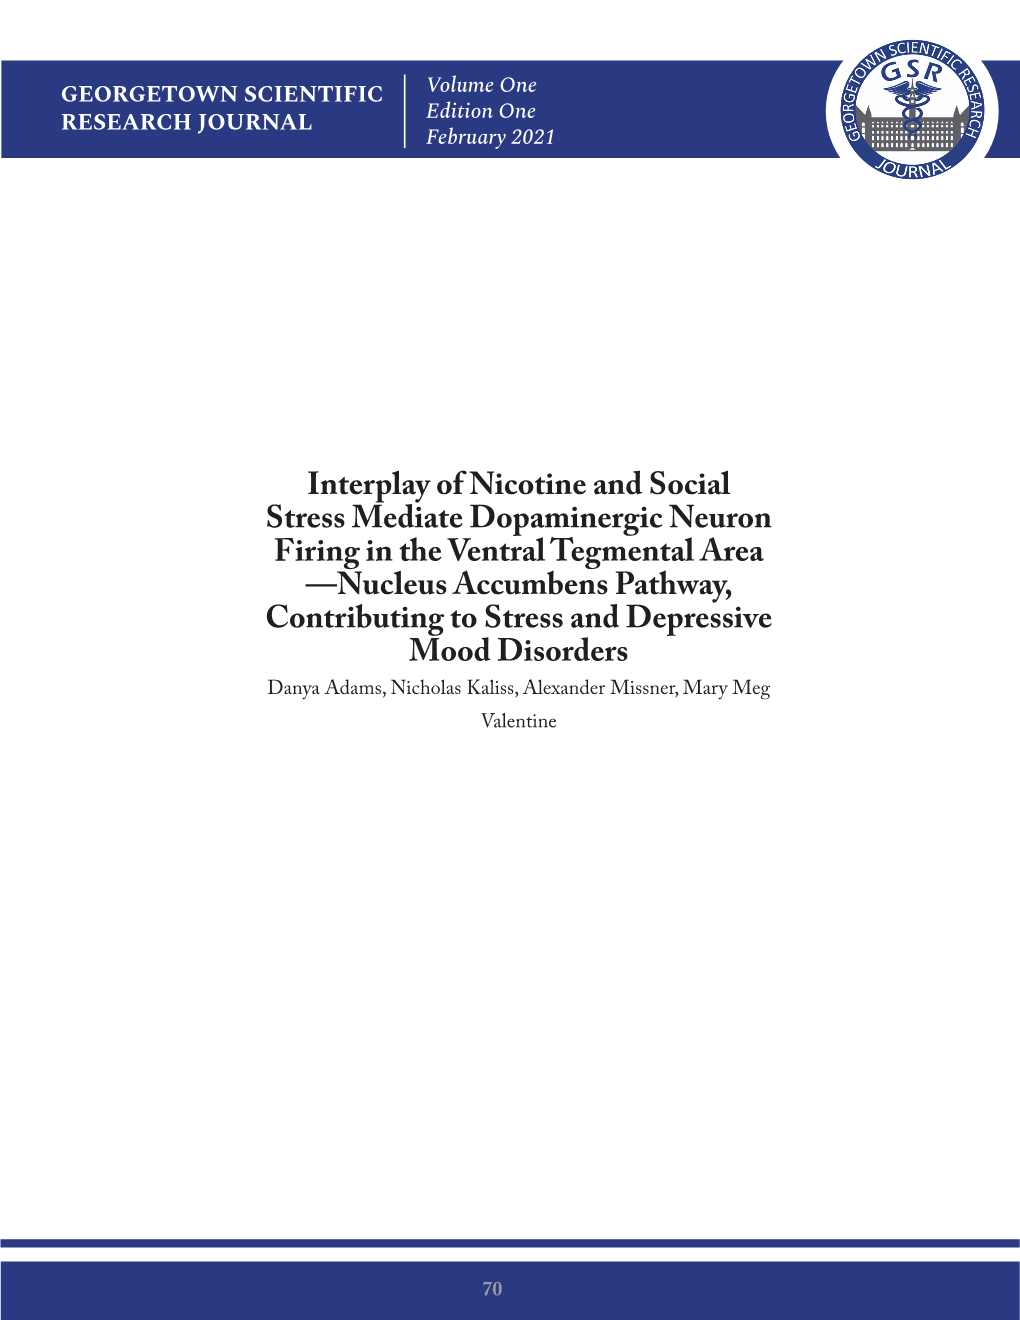 Interplay of Nicotine and Social Stress Mediate Dopaminergic Neuron